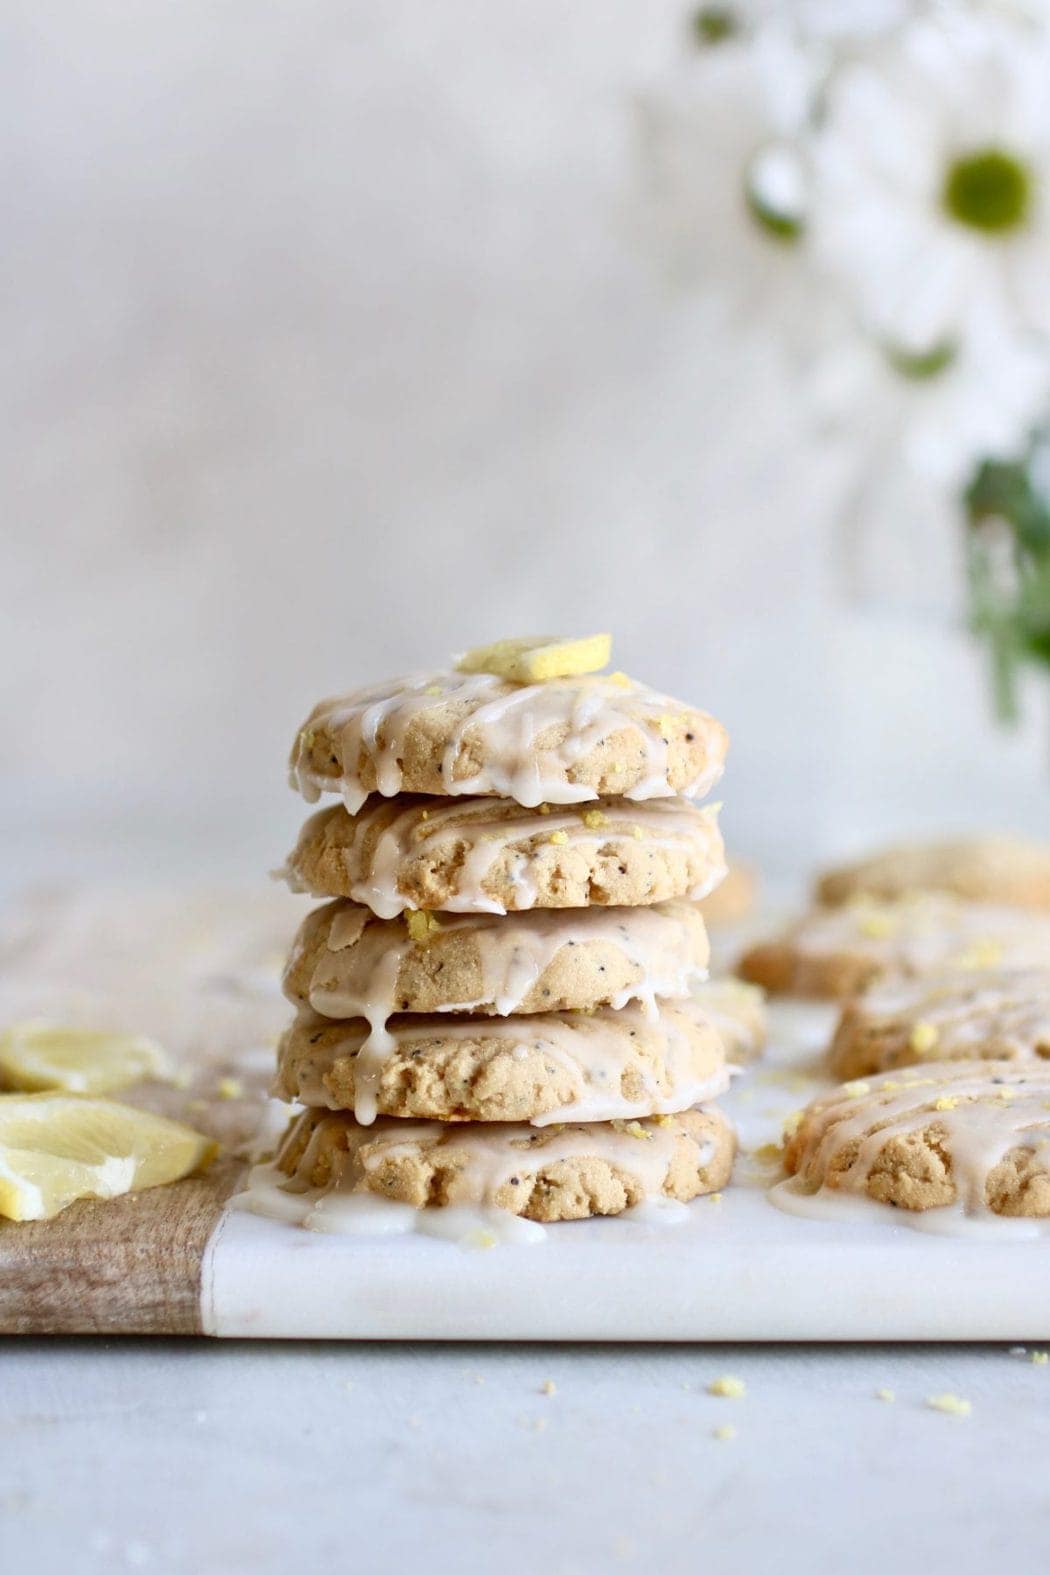 Photo of a stack of five Paleo Lemon Poppy Seed Cookies drizzled with a glaze.